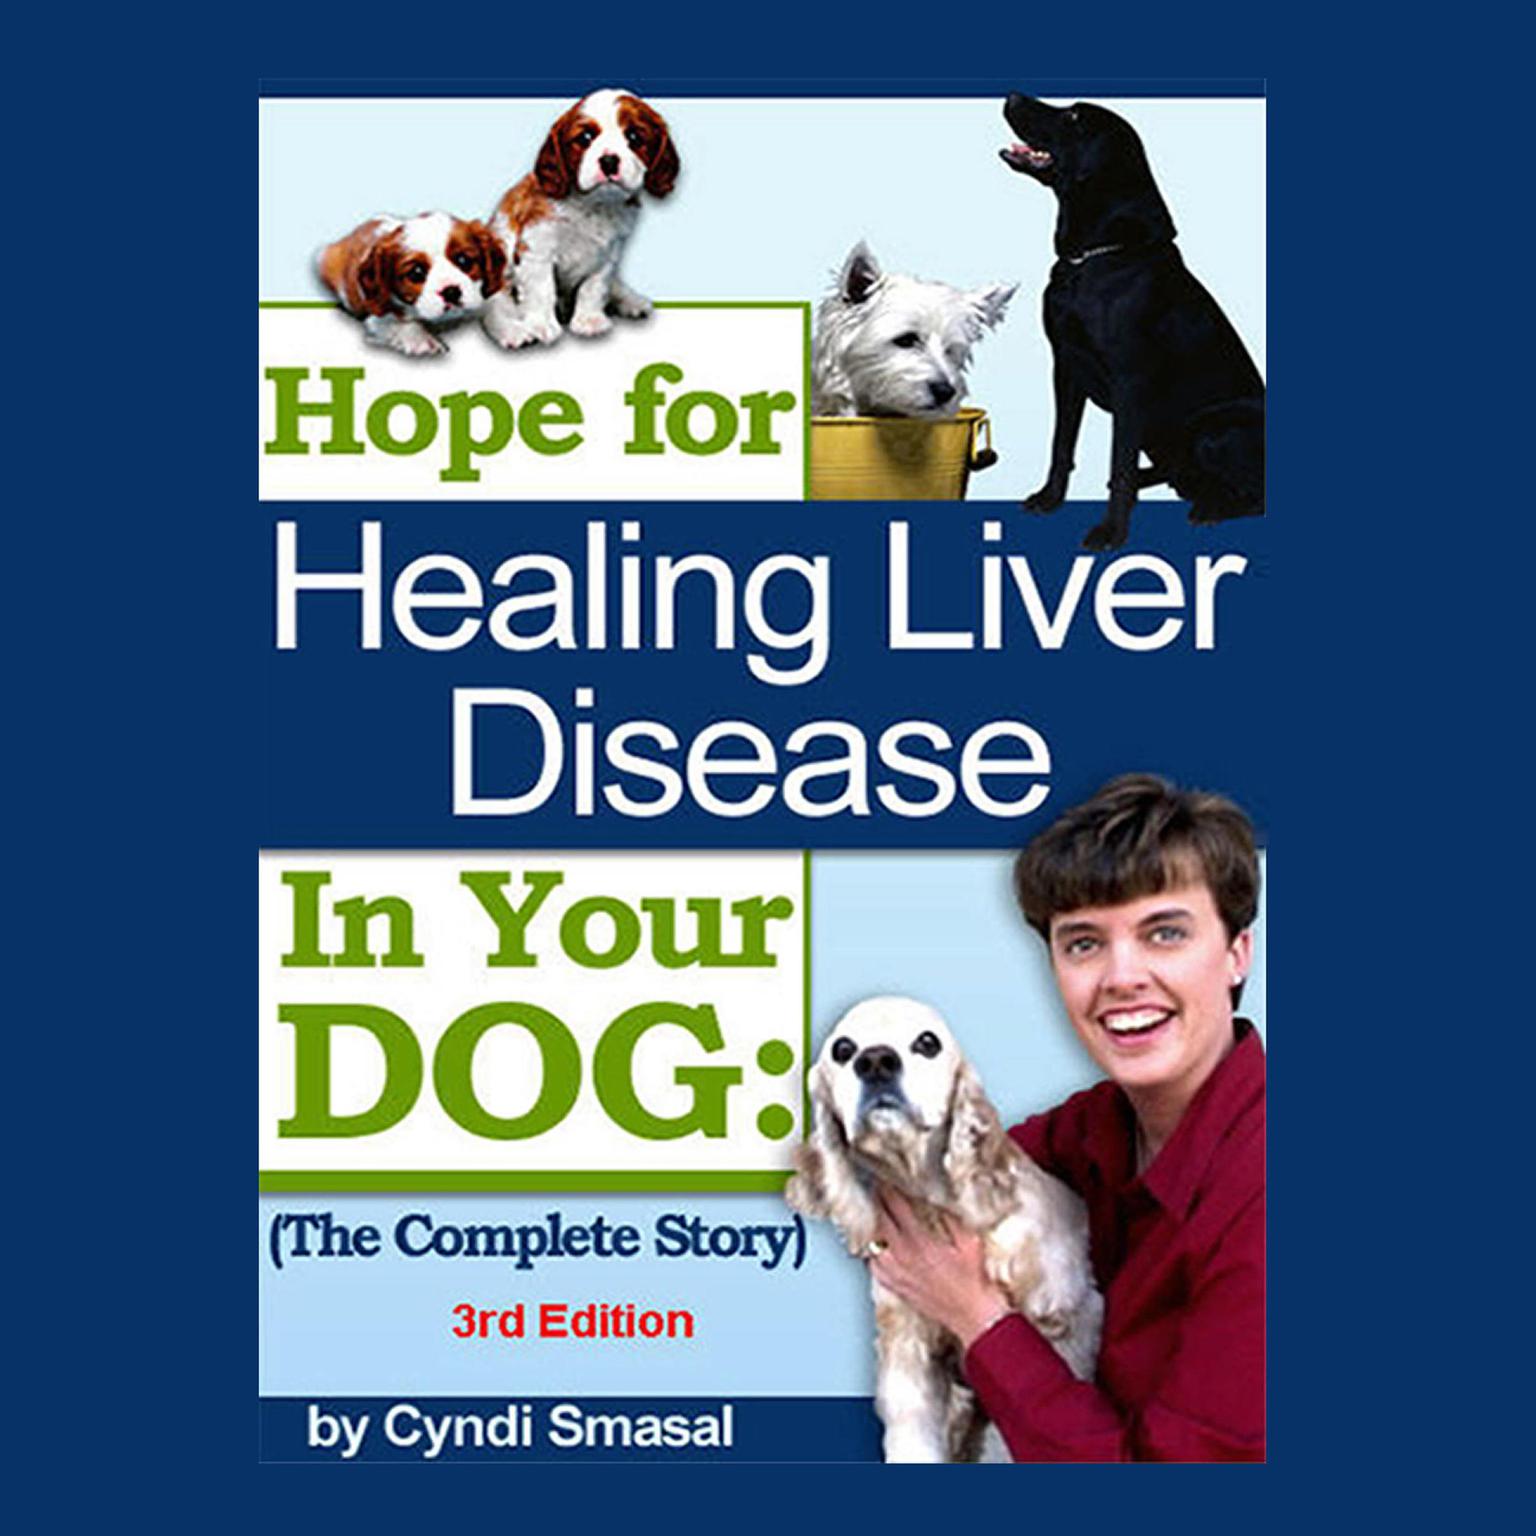 Hope For Healing Liver Disease In Your Dog - 3rd Edition Audiobook, by Cyndi Smasal